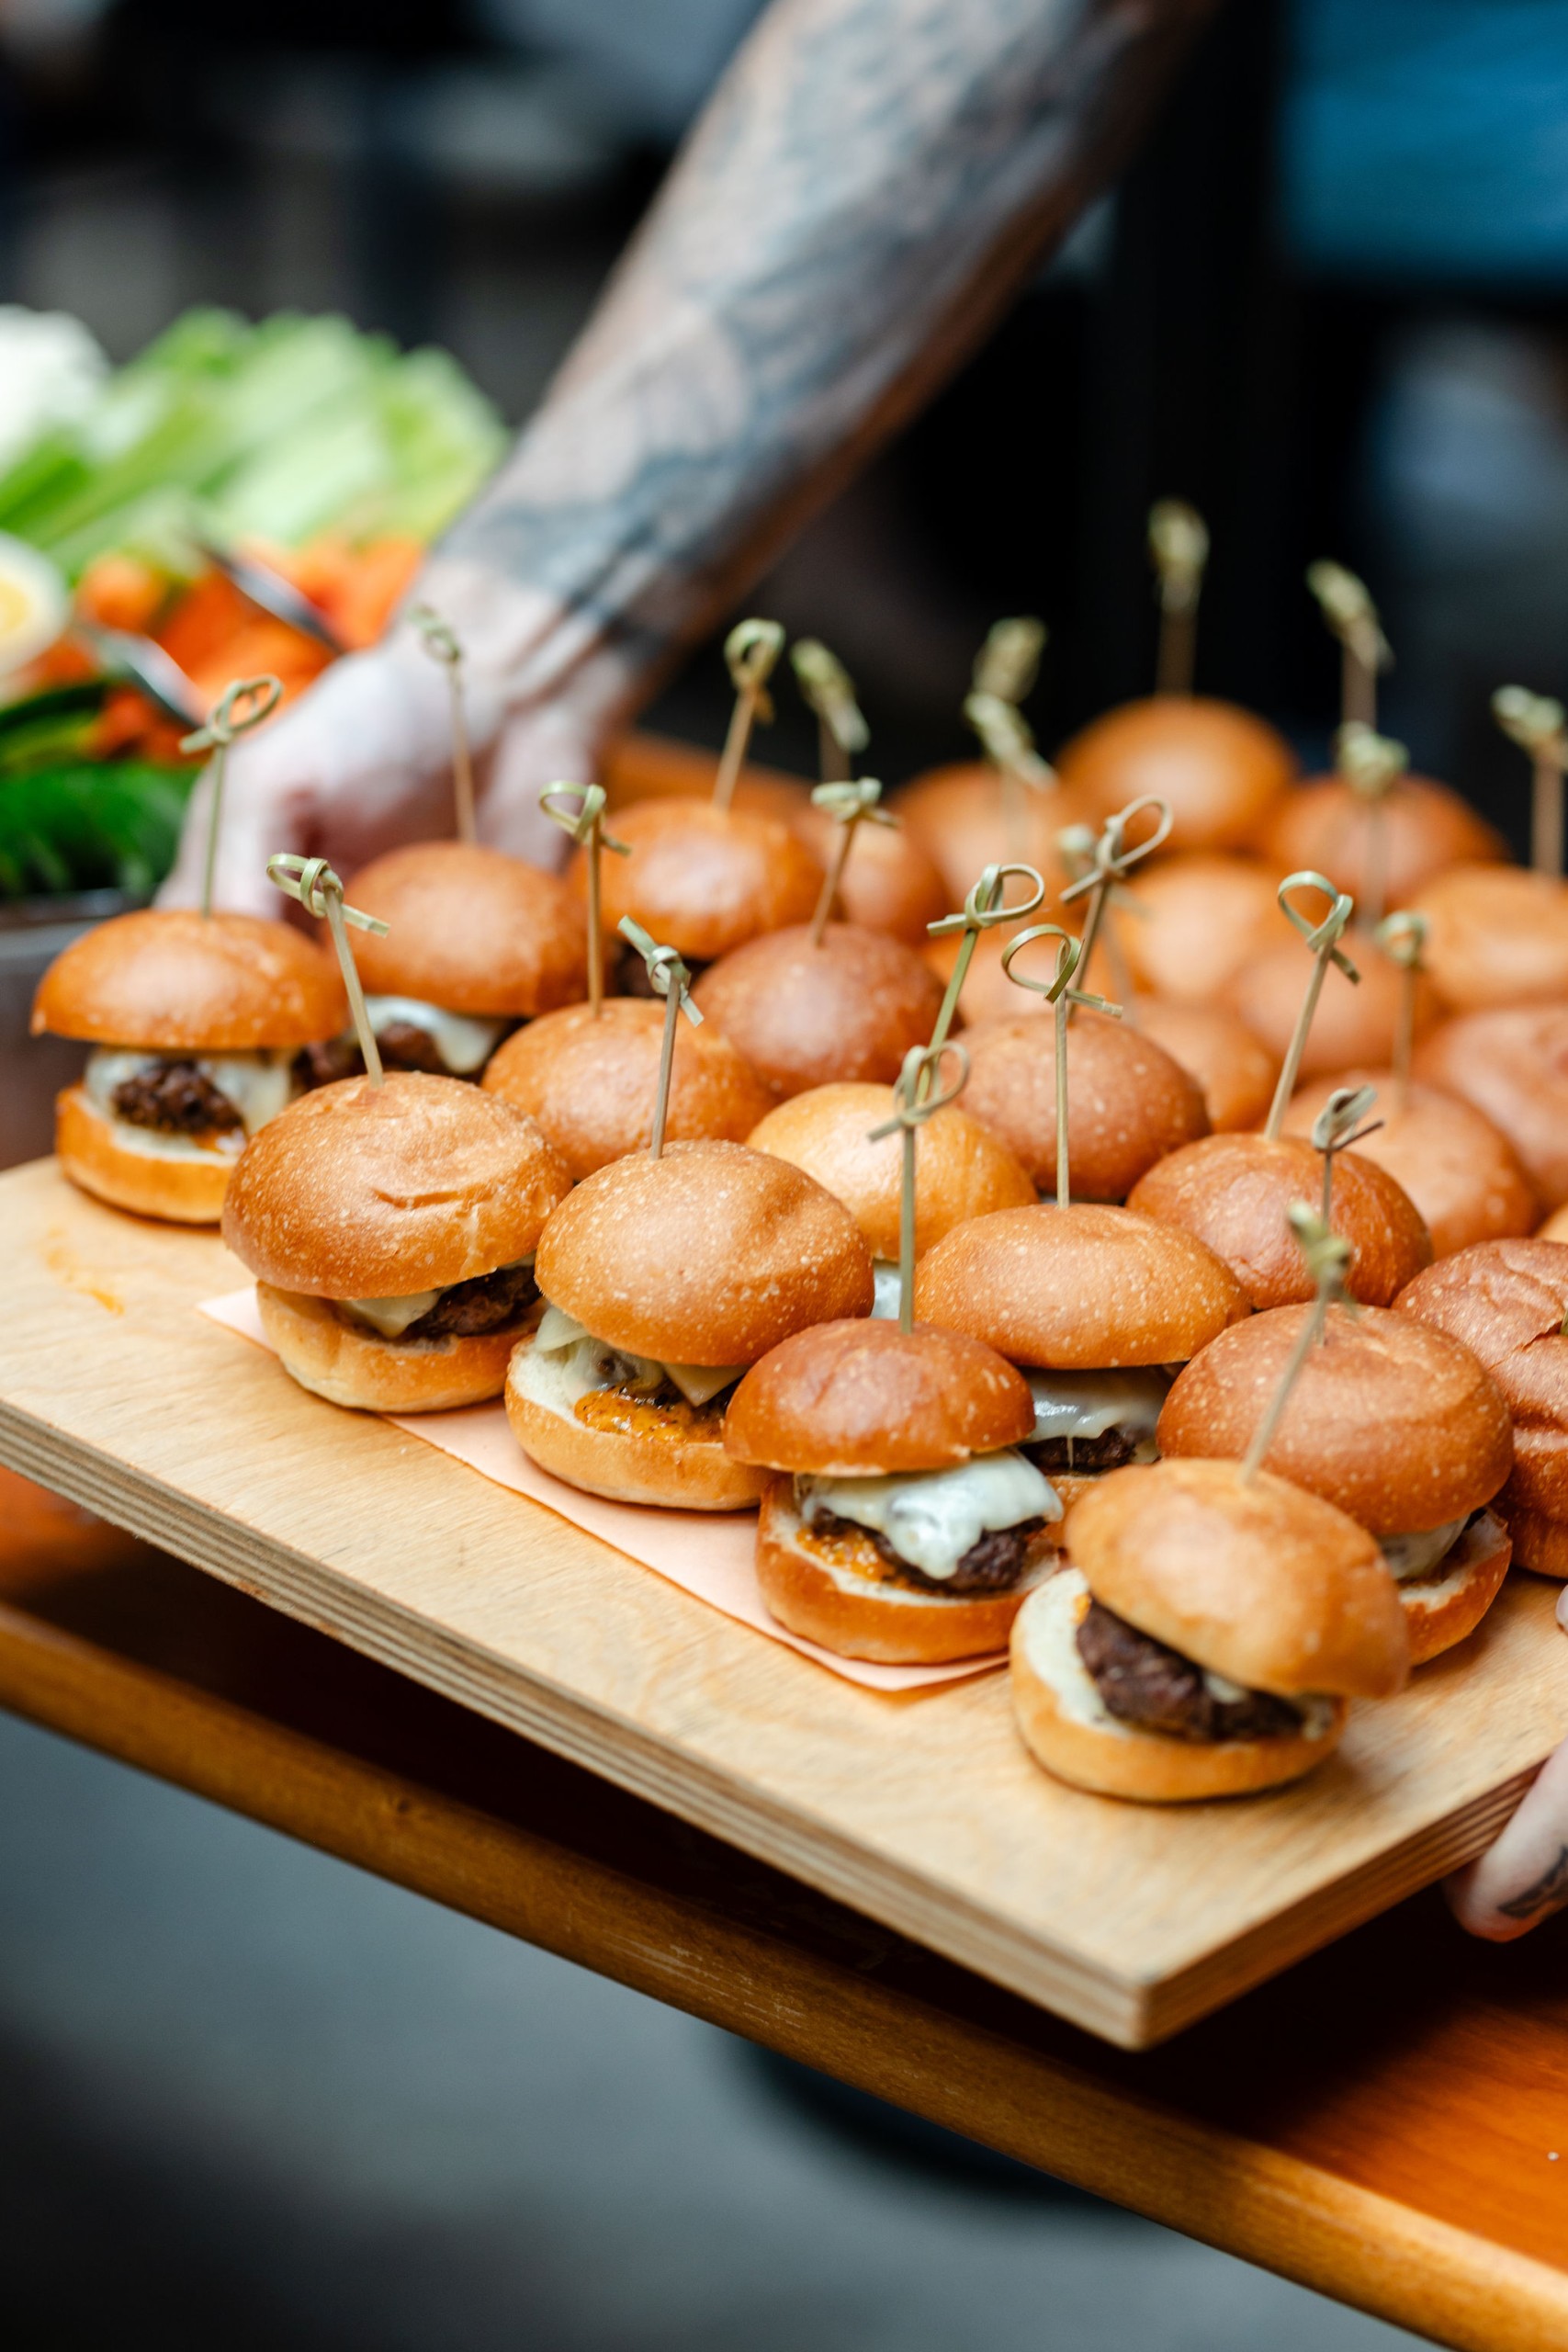 At a social event, a man captures moments of guests holding trays of sliders.